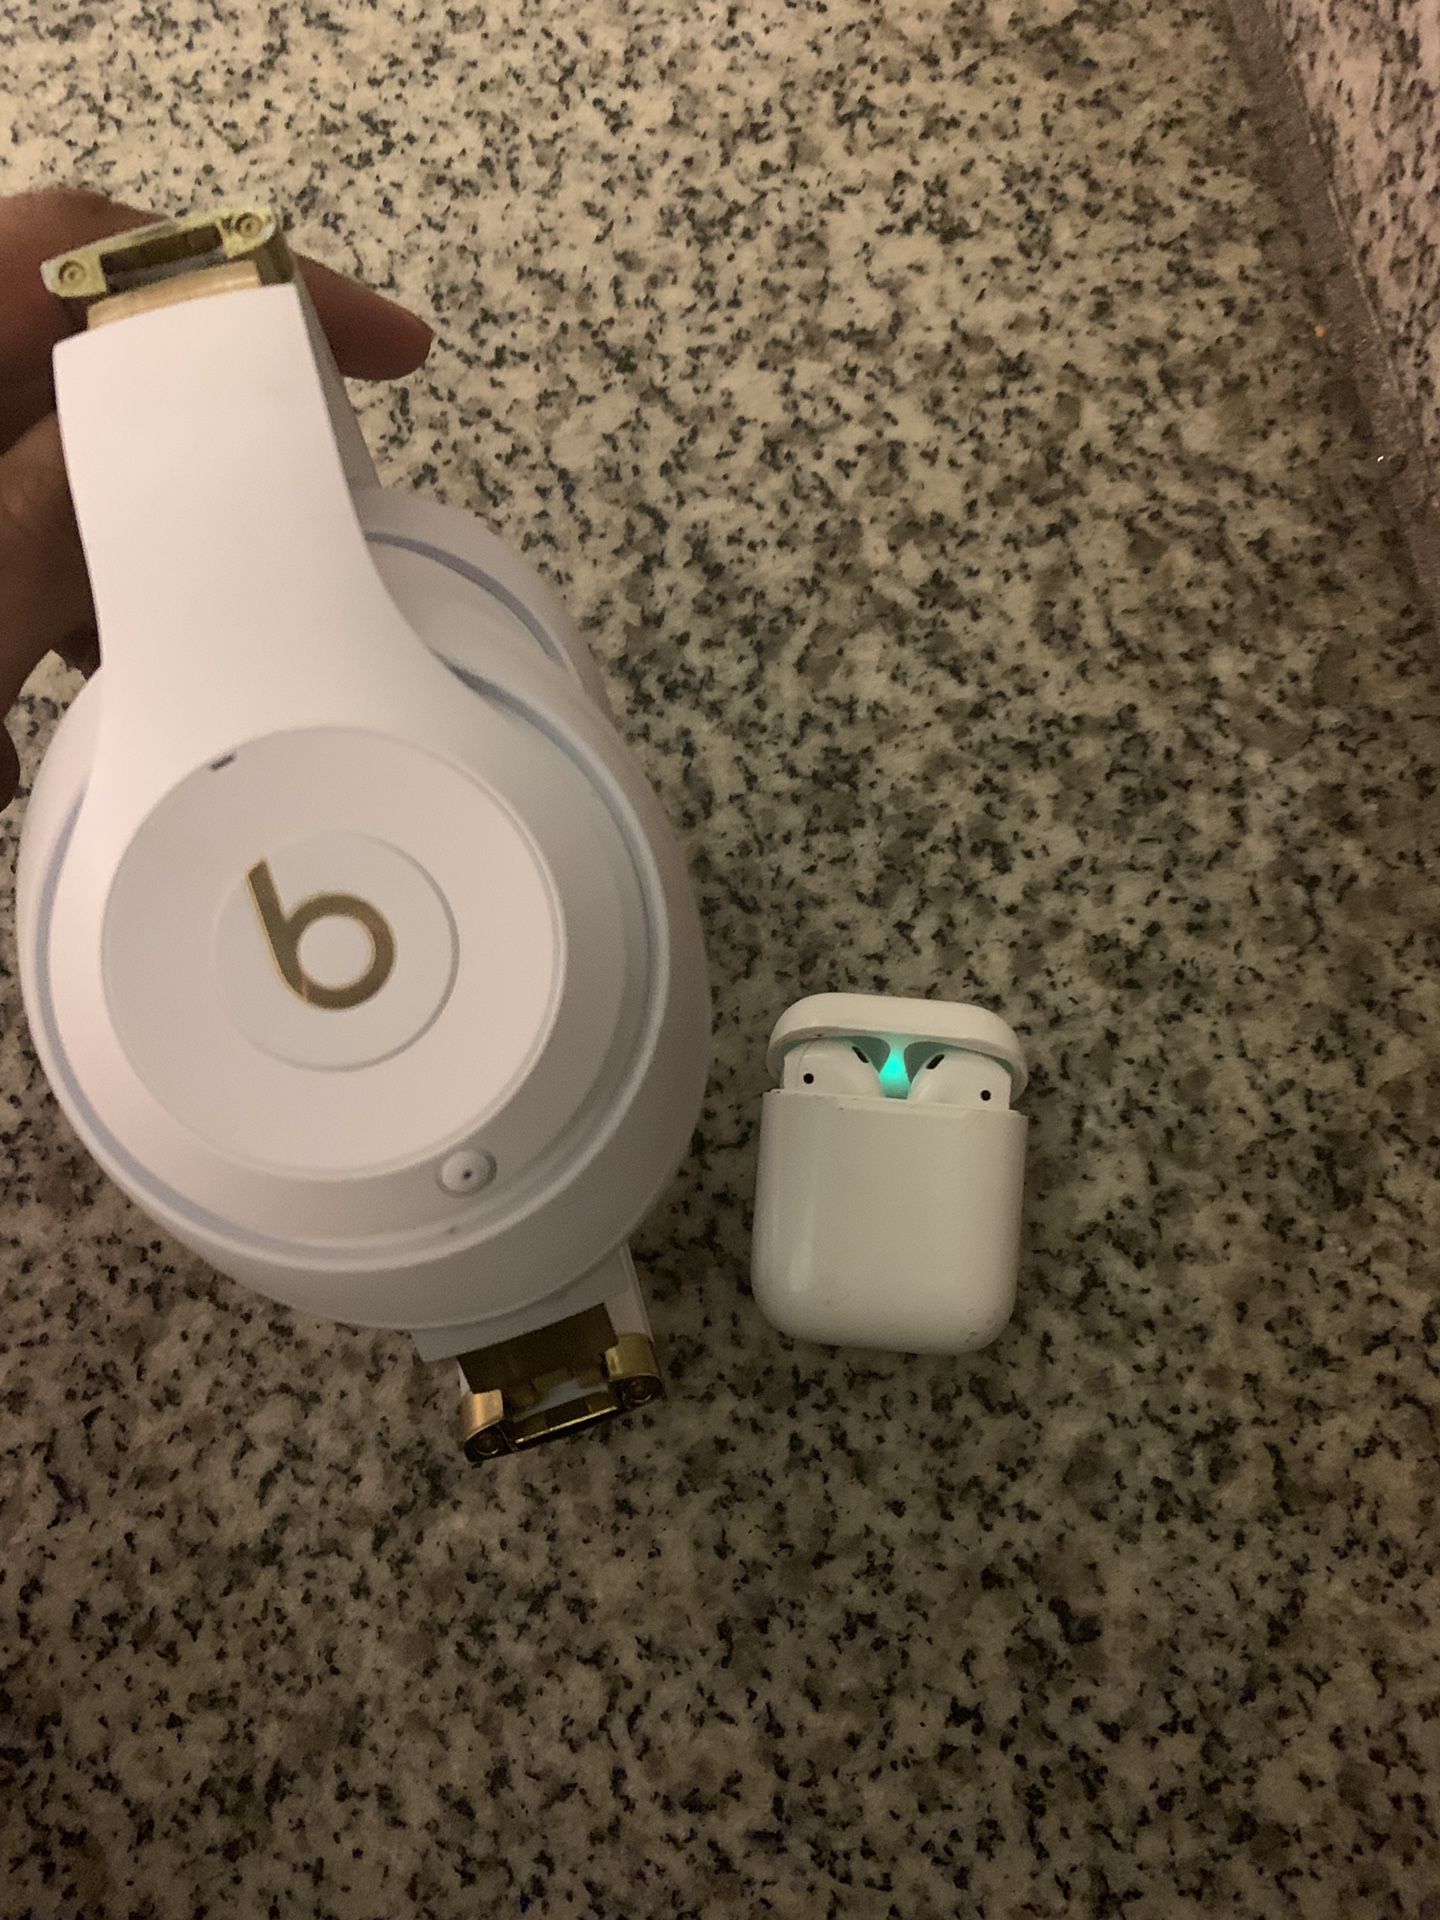 Beats studio 3 wireless and Apple AirPods second edition